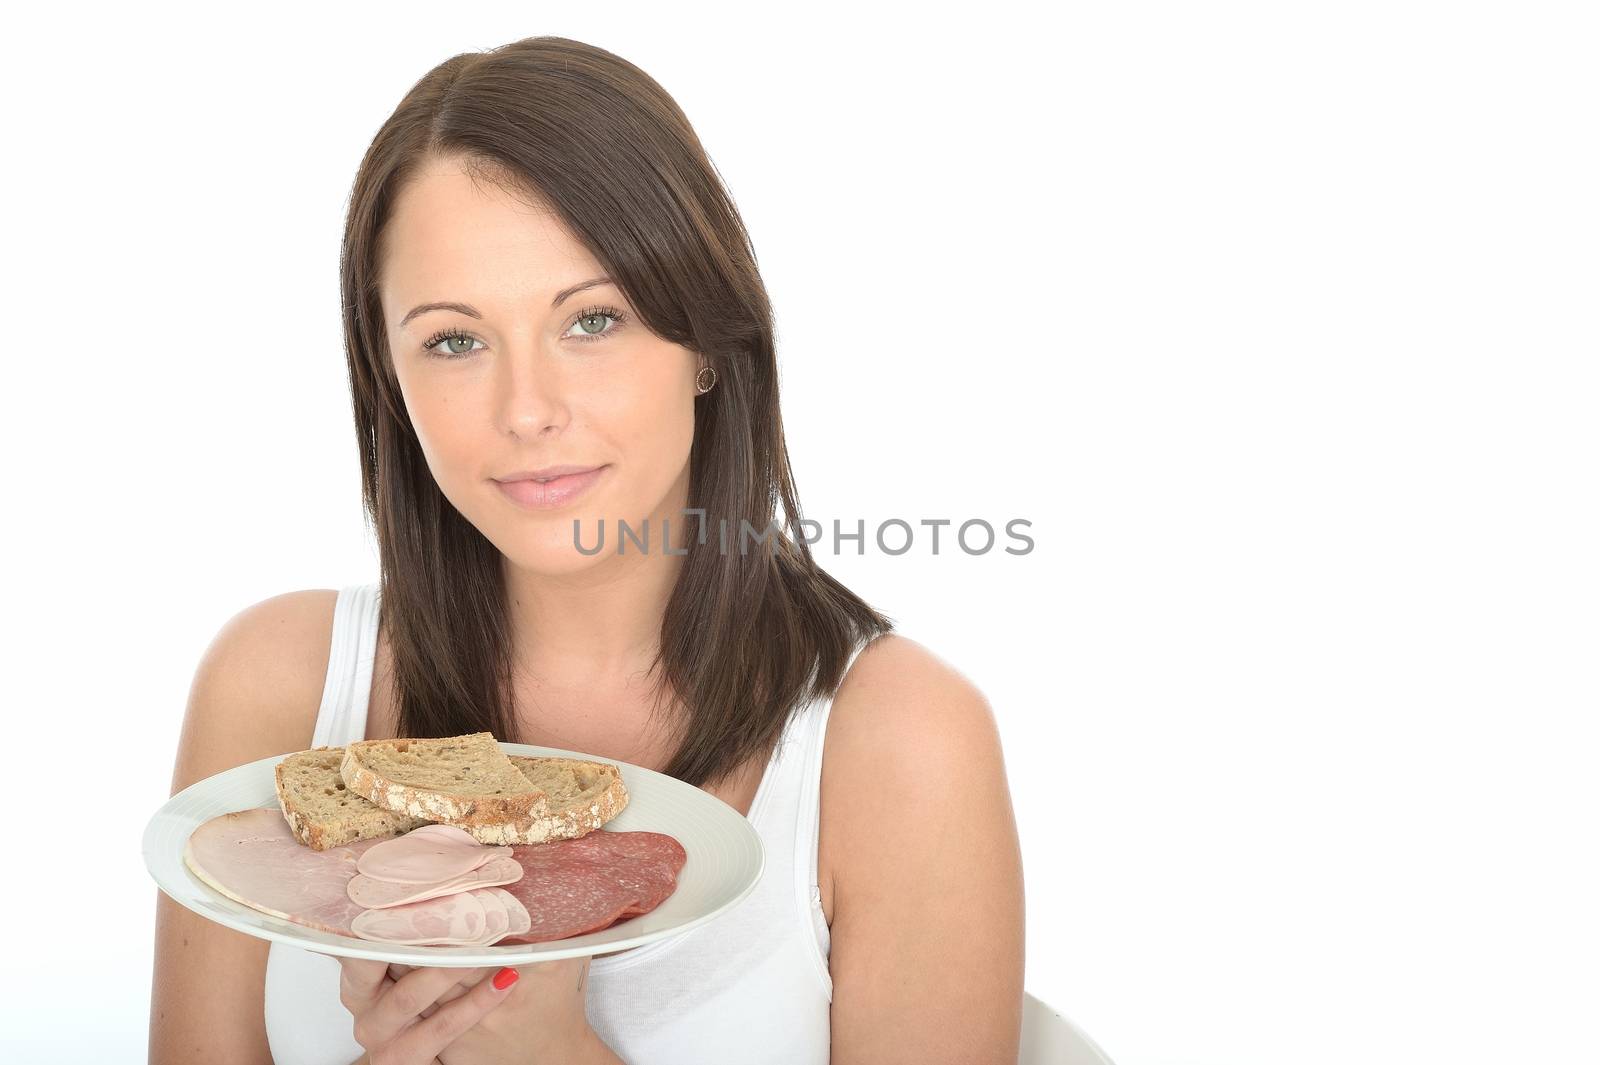 Healthy Young Woman Holding a Typical Norwegian Style Cold Buffe by Whiteboxmedia